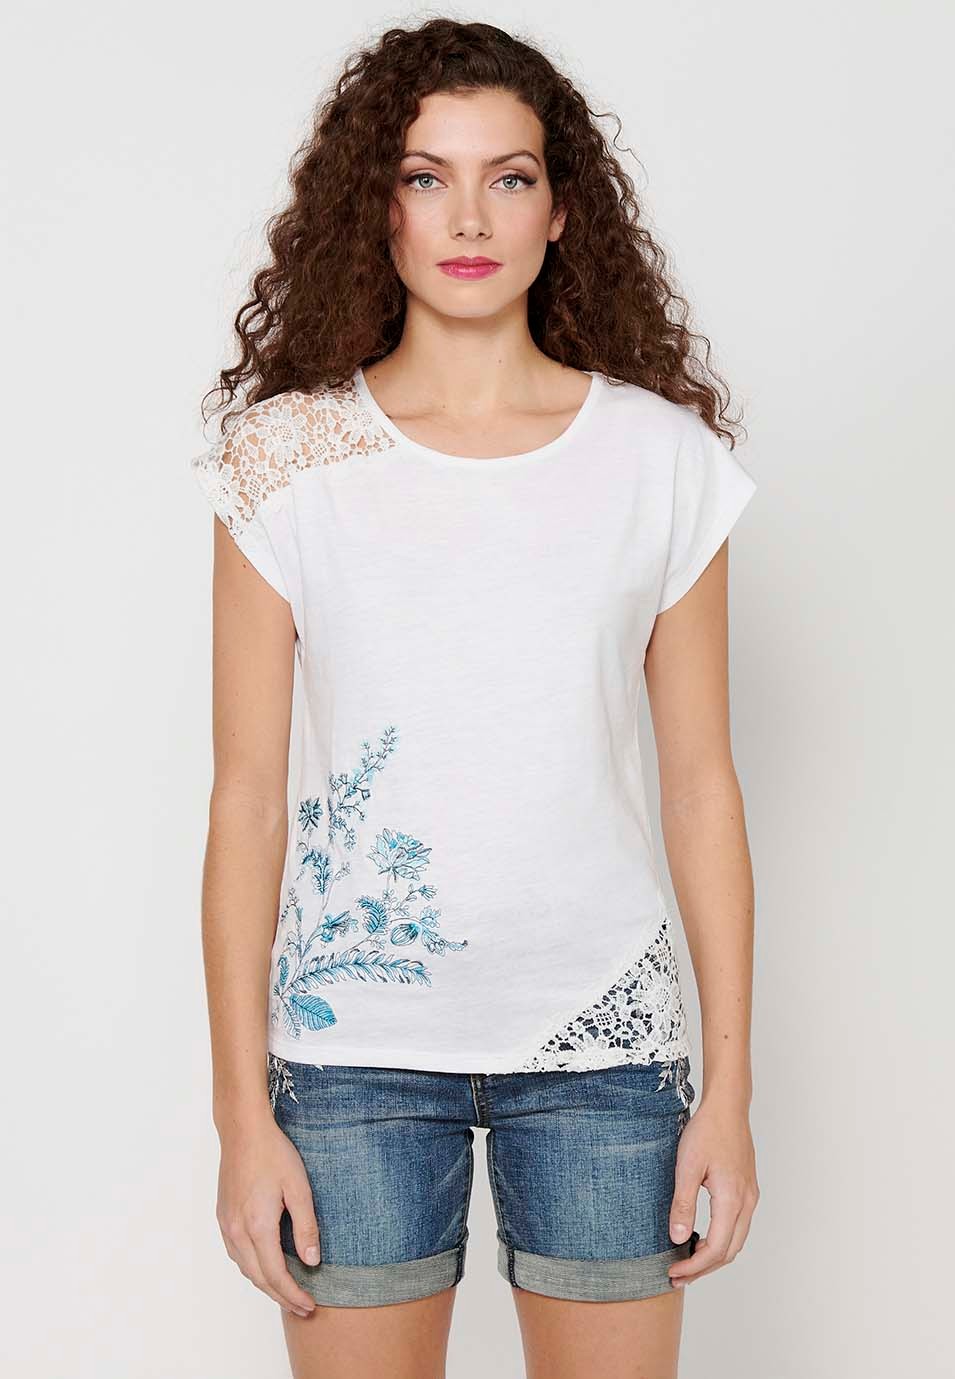 Short-sleeved T-shirt Cotton Top with Round Neck and Front Floral Embroidery in White for Women 2